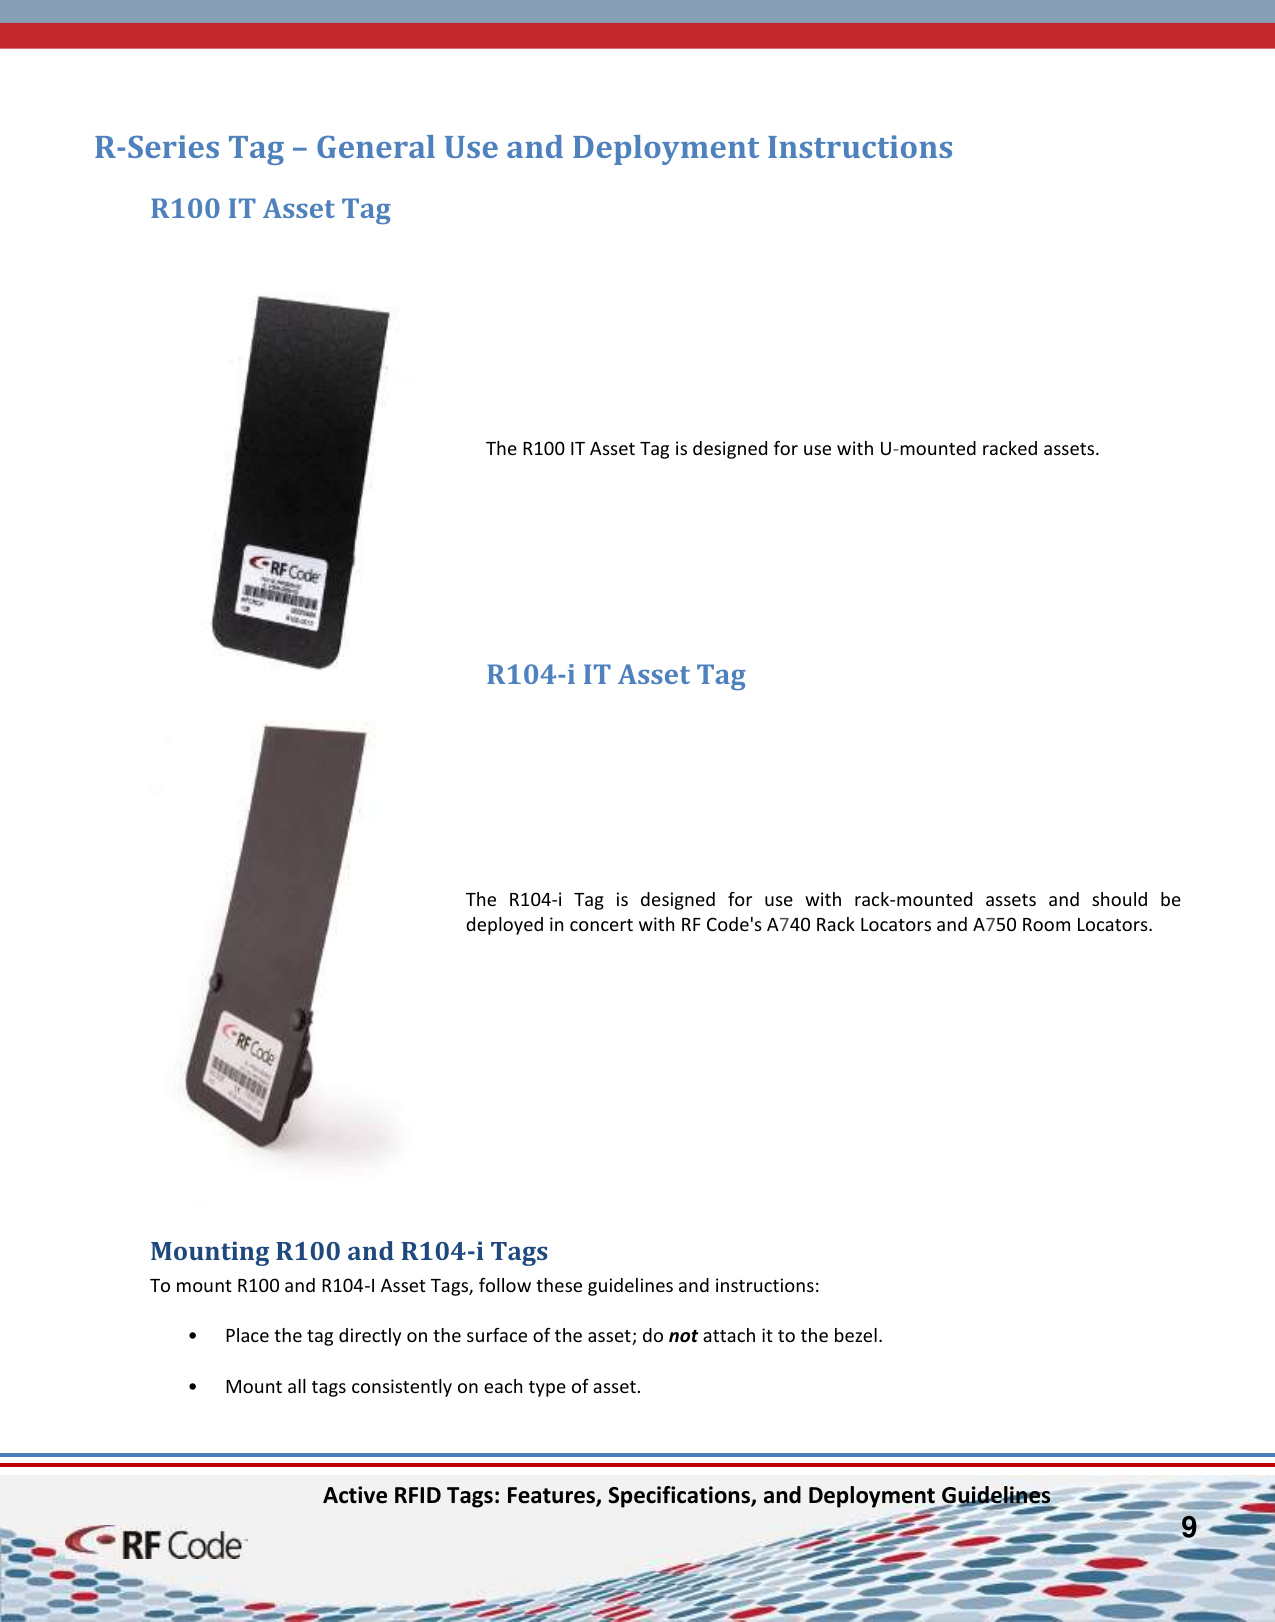    Active RFID Tags: Features, Specifications, and Deployment Guidelines         9         R-Series Tag – General Use and Deployment Instructions R100 IT Asset Tag         The R100 IT Asset Tag is designed for use with U-mounted racked assets.     R104-i IT Asset Tag        The  R104-i  Tag  is  designed  for  use  with  rack-mounted  assets  and  should  be deployed in concert with RF Code&apos;s A740 Rack Locators and A750 Room Locators.        Mounting R100 and R104-i Tags To mount R100 and R104-I Asset Tags, follow these guidelines and instructions:  • Place the tag directly on the surface of the asset; do not attach it to the bezel.   • Mount all tags consistently on each type of asset.   